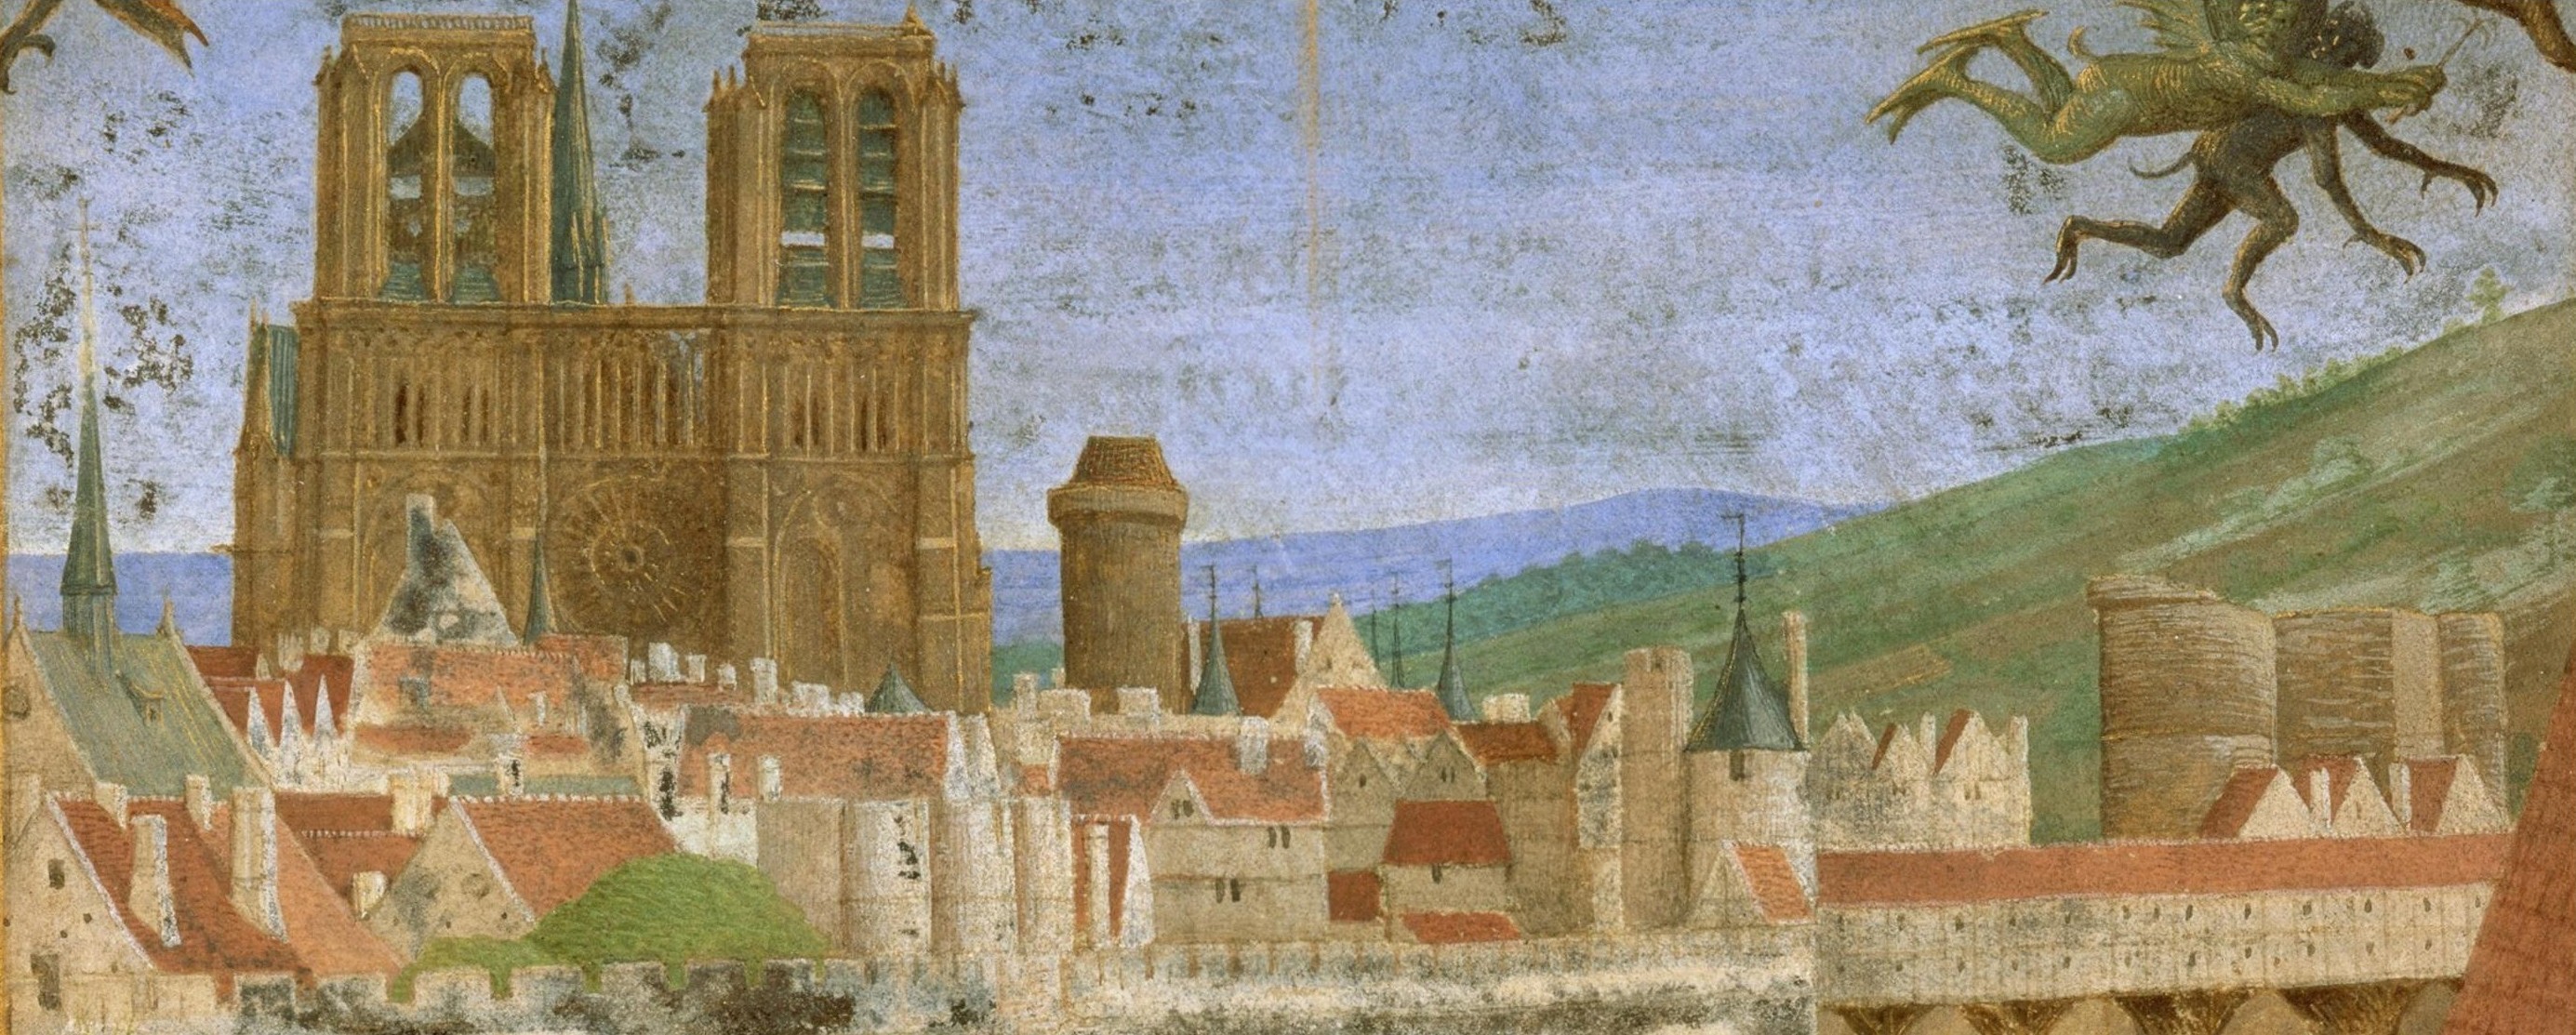 A History of the Medieval University of Paris – Brewminate: A Bold